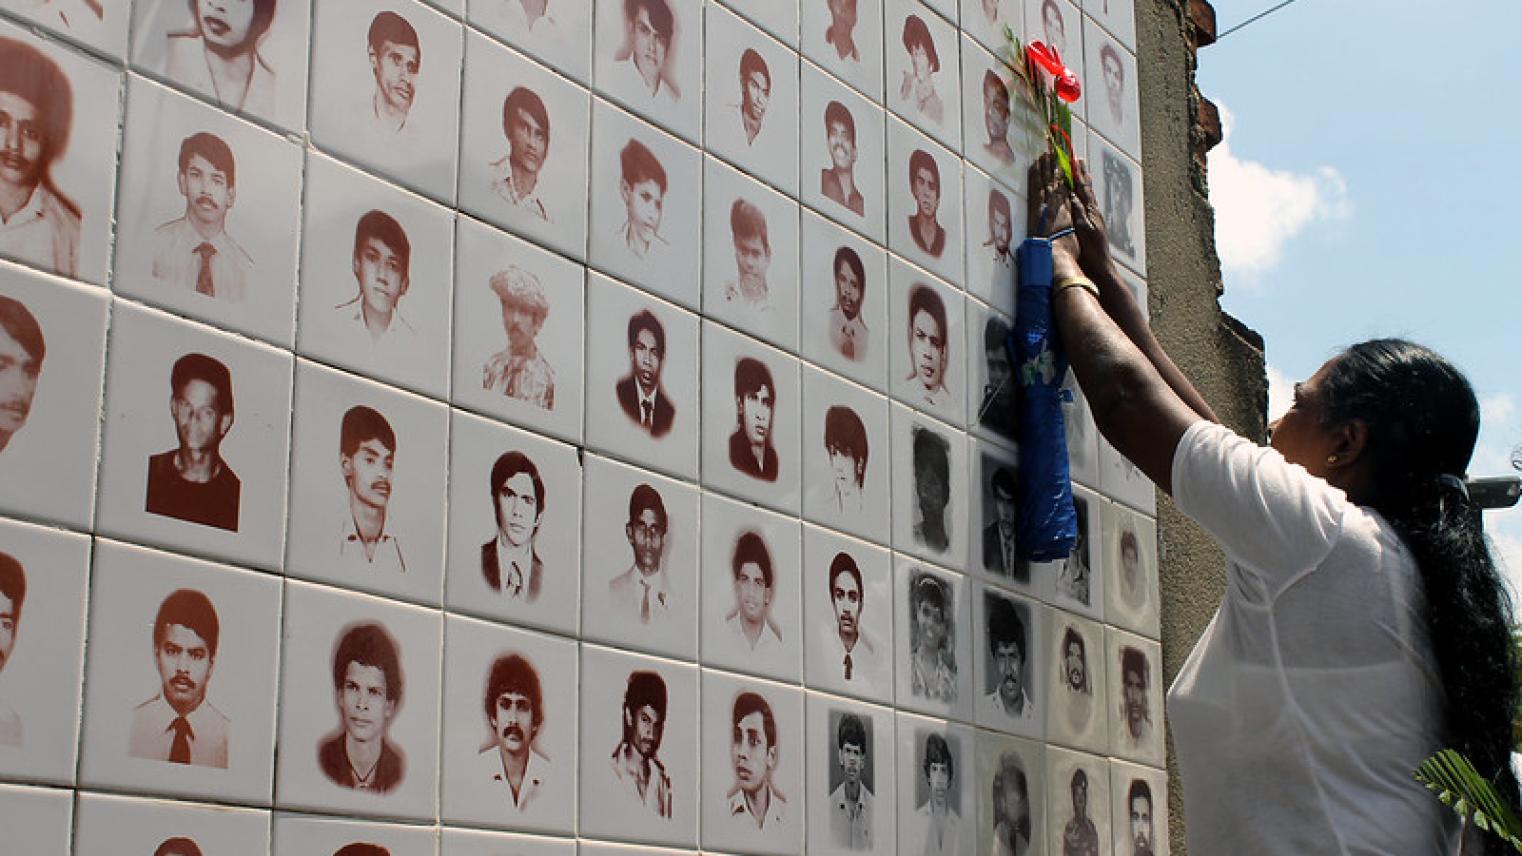 Image of woman grieving at memorial wall of missing persons in Sri Lanka https://flic.kr/p/h1KJ7Y, by citizen journalists Vikalpa, Maatram and Groundviews, used under CC BY 2.0 license.